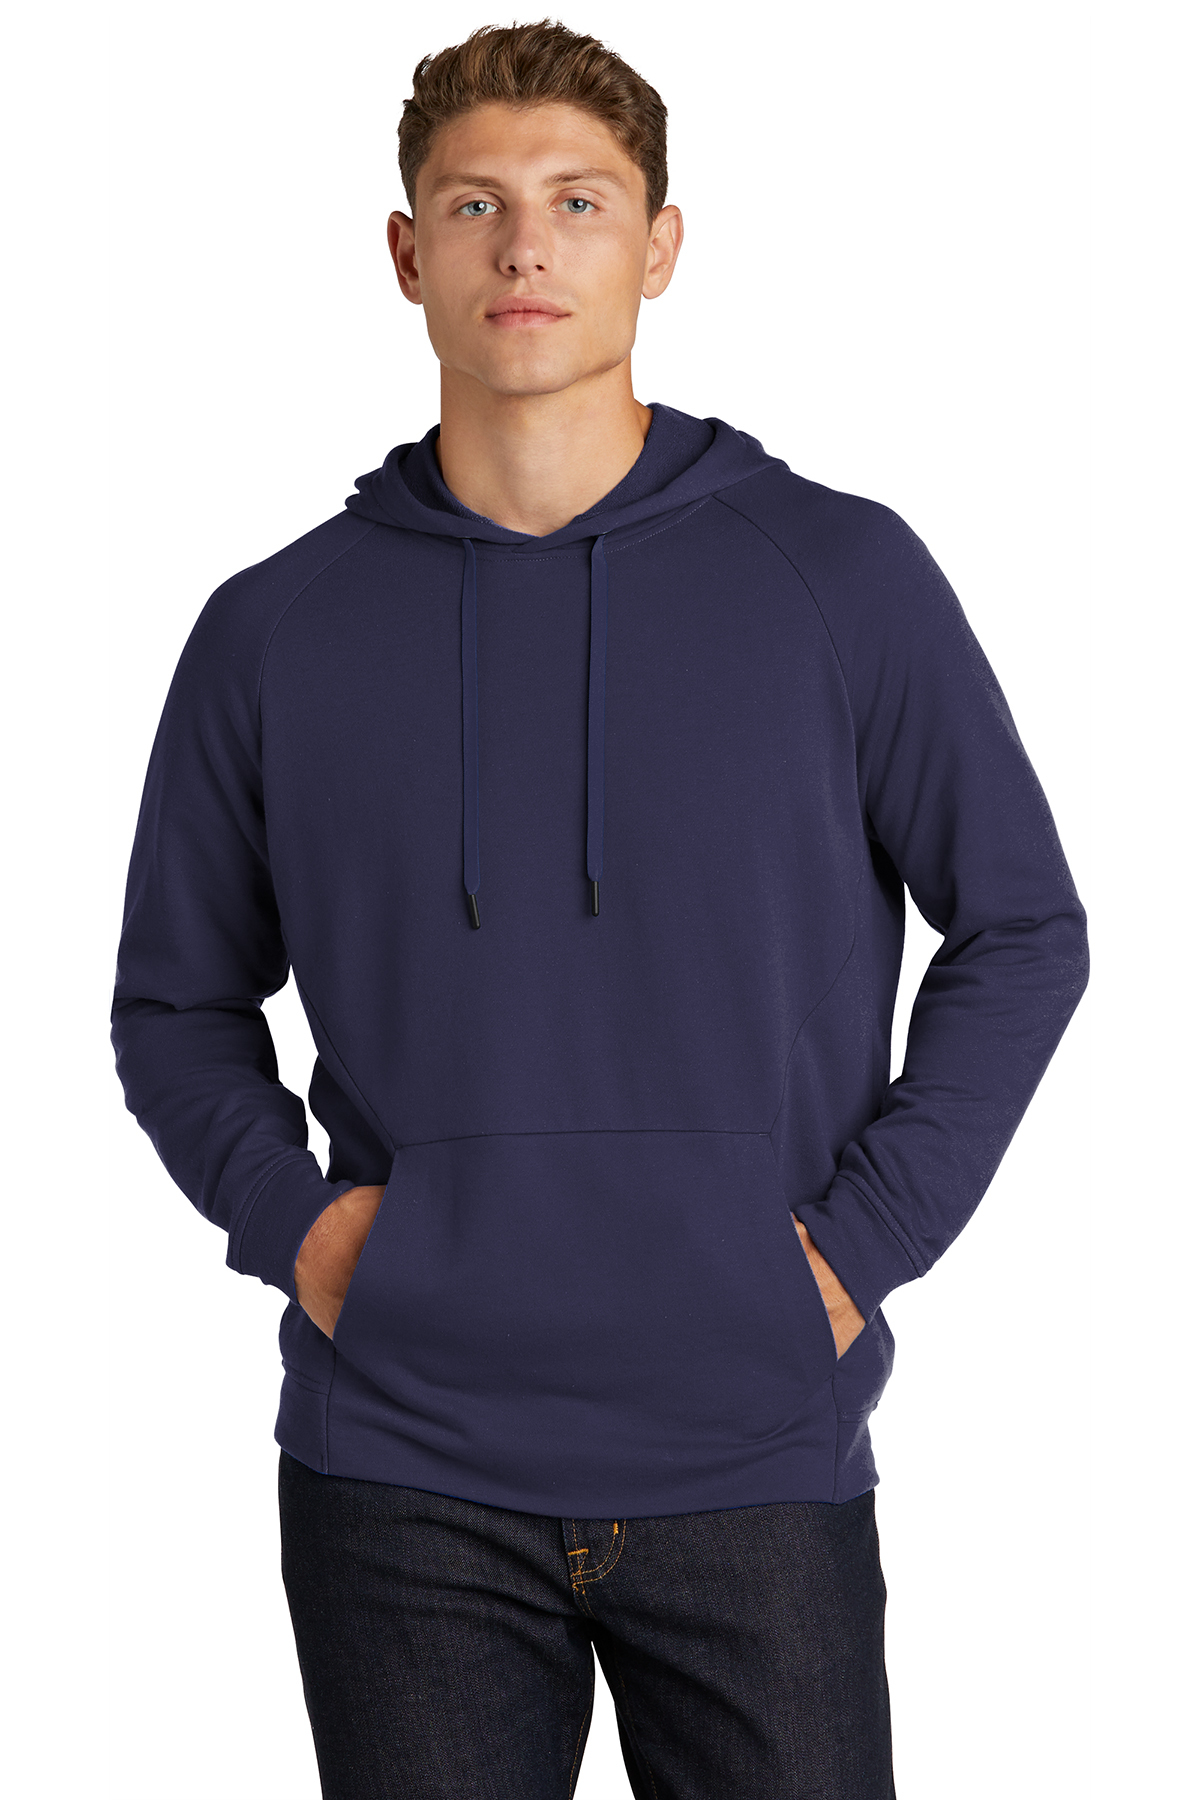 Sport-Tek Lightweight French Terry Pullover Hoodie | Product | Company ...